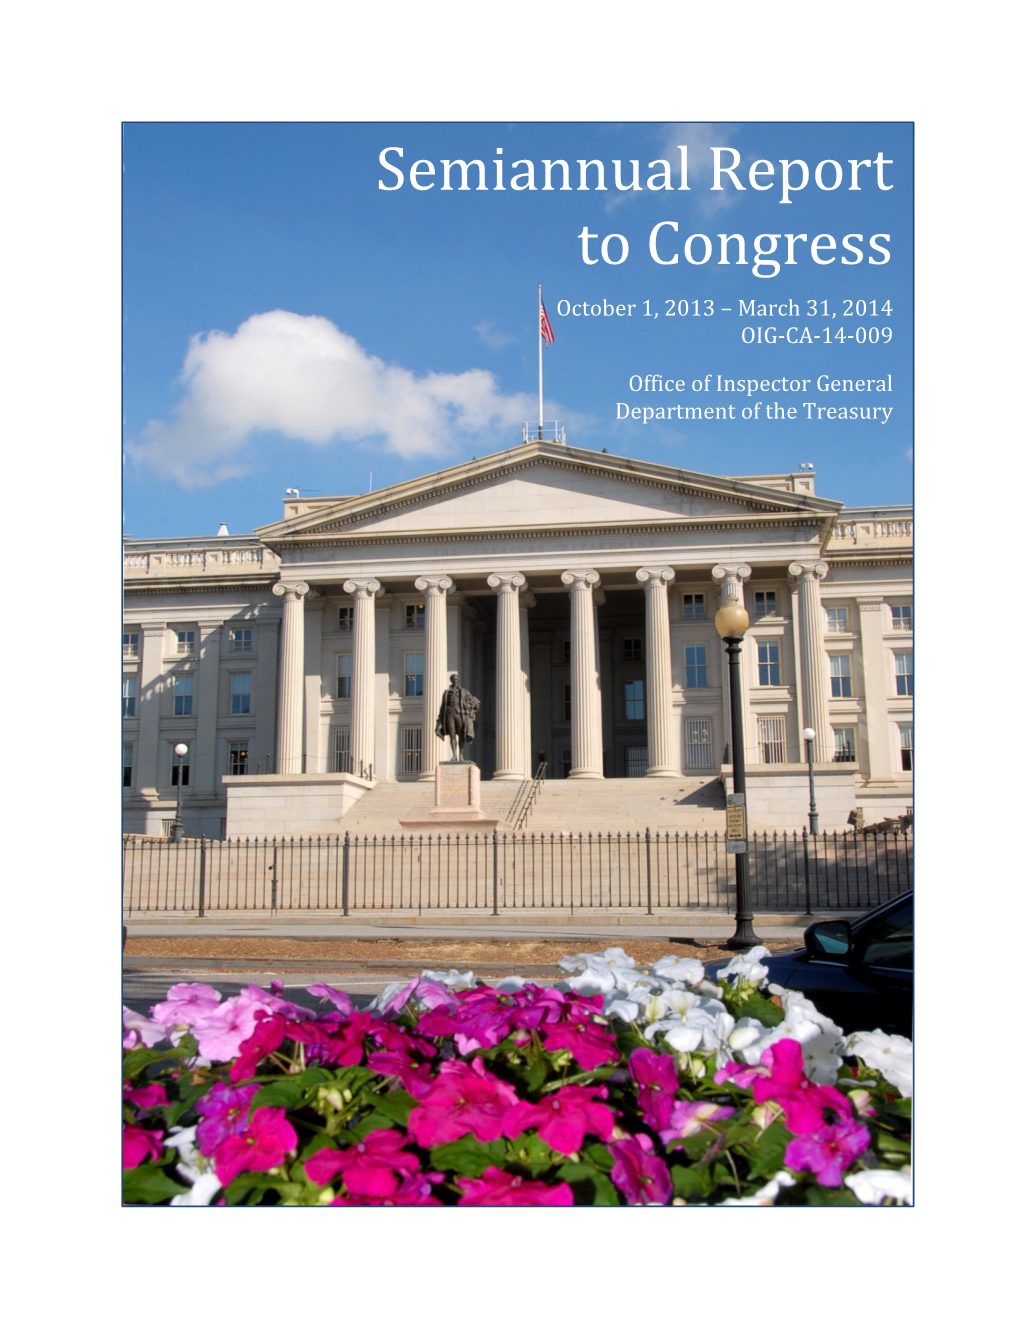 Semiannual Report to Congress Mar 2014